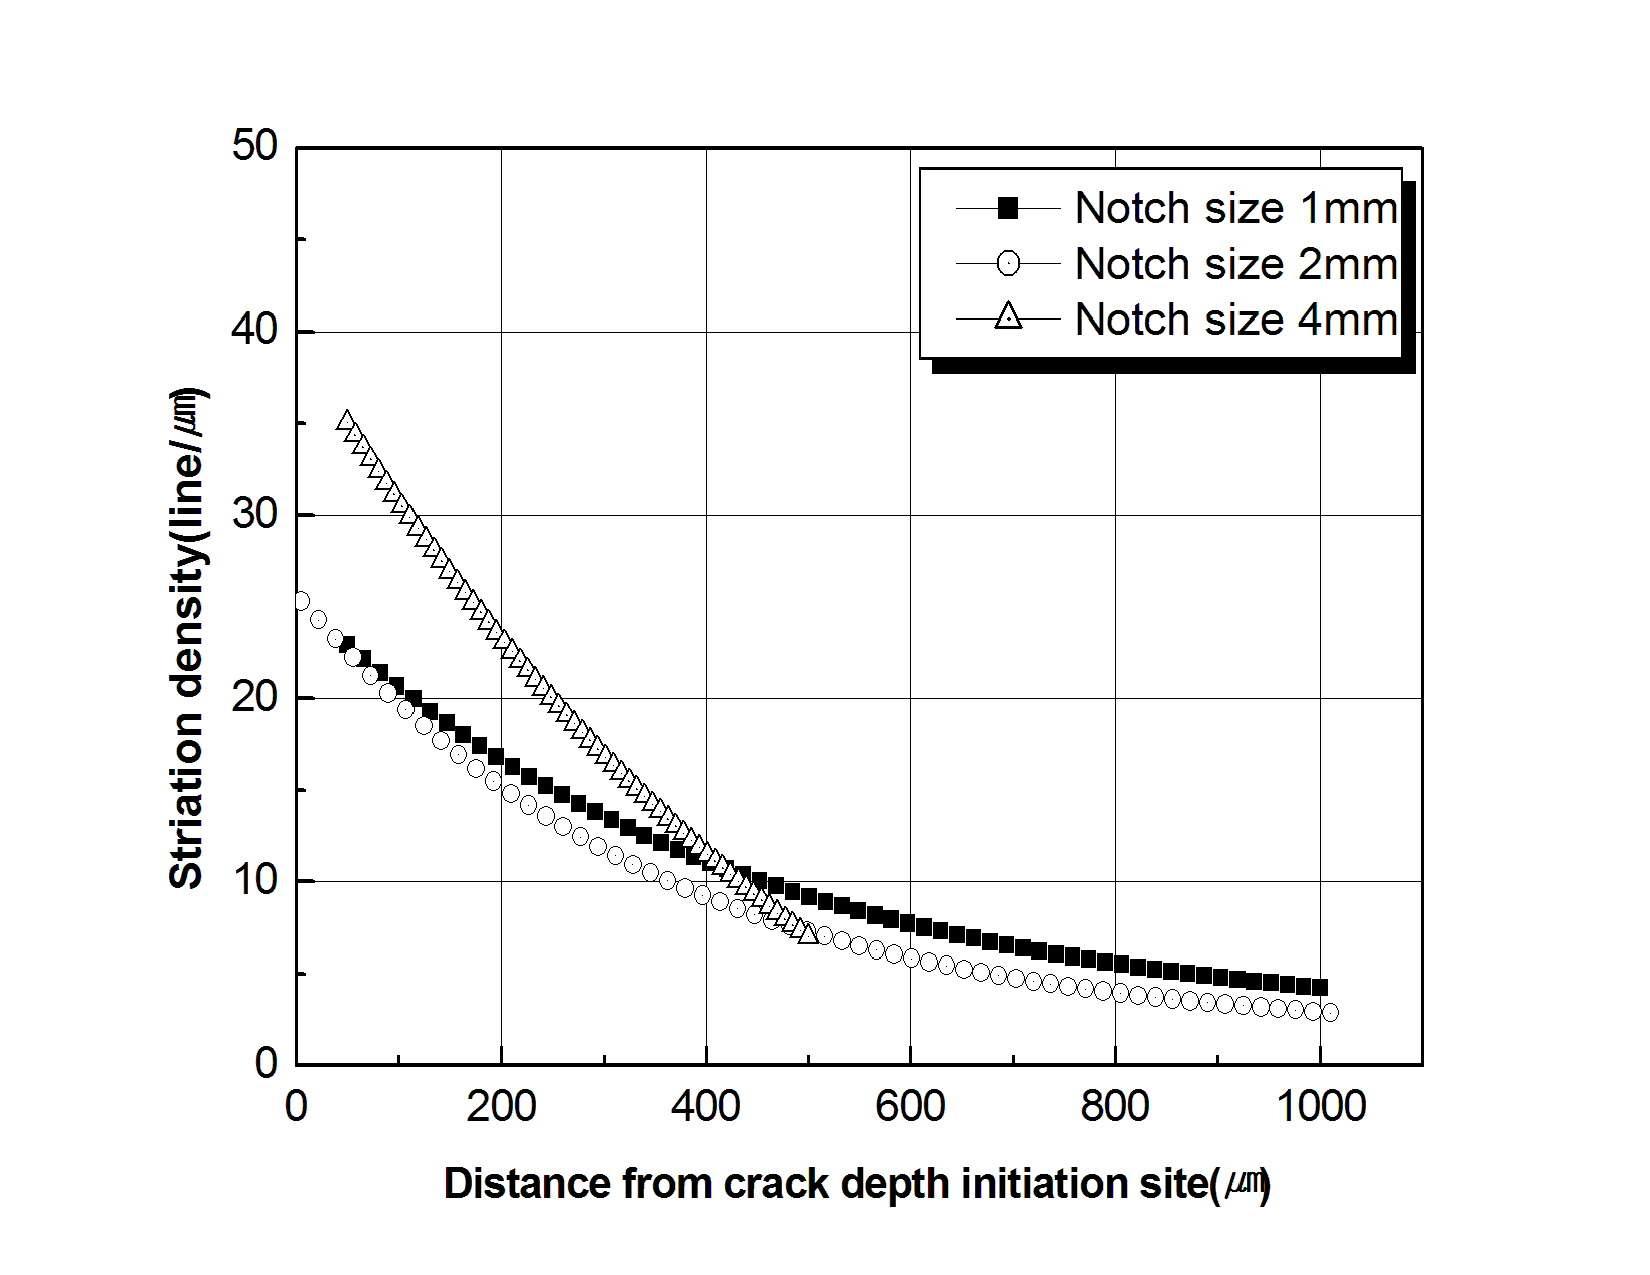 Comparison of striation density versus crack depth for the notch size 1㎜, 2㎜ and 4㎜